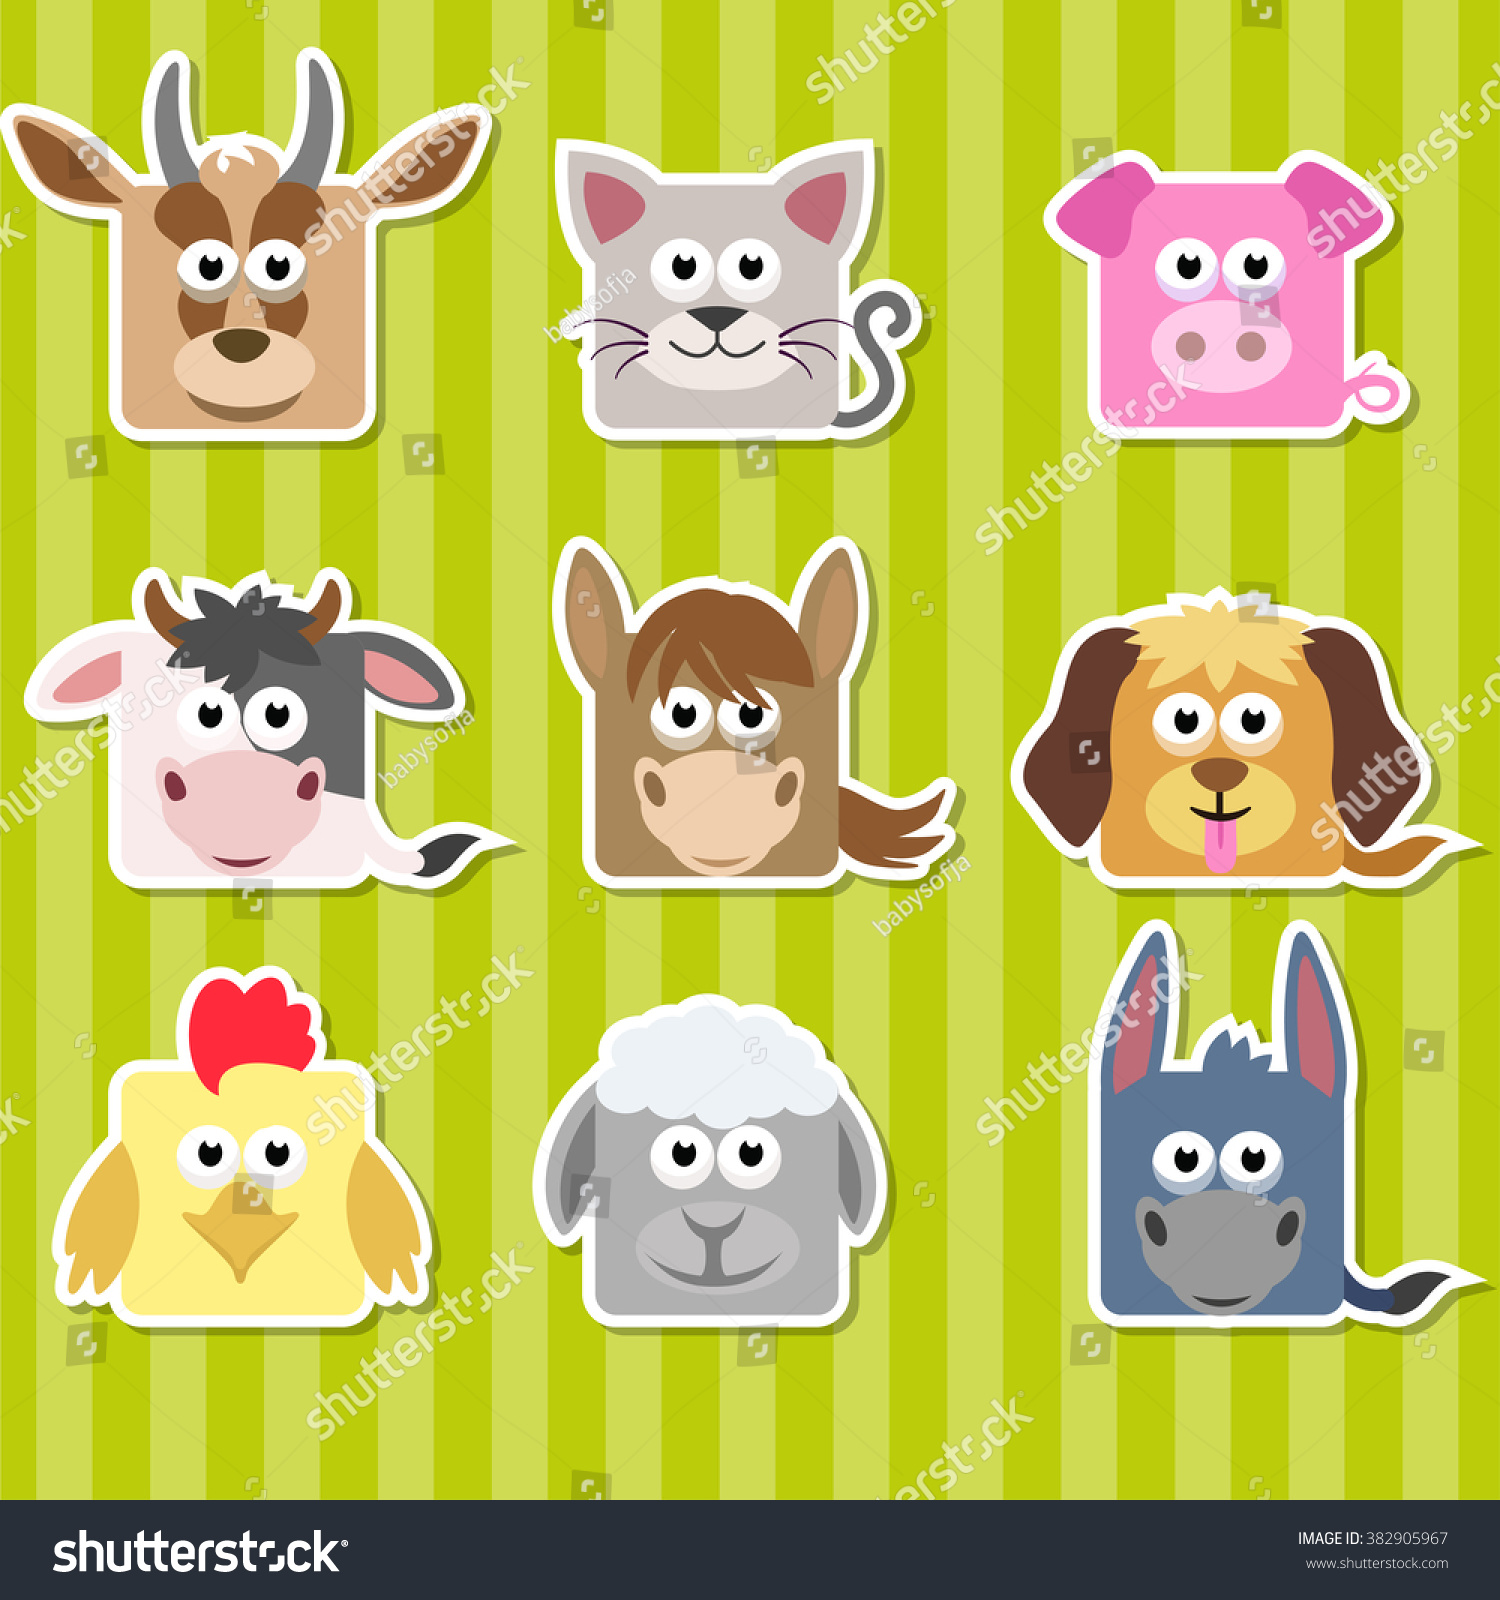 Set Of Cute Cartoon Square Home Animals Stickers Stock Vector